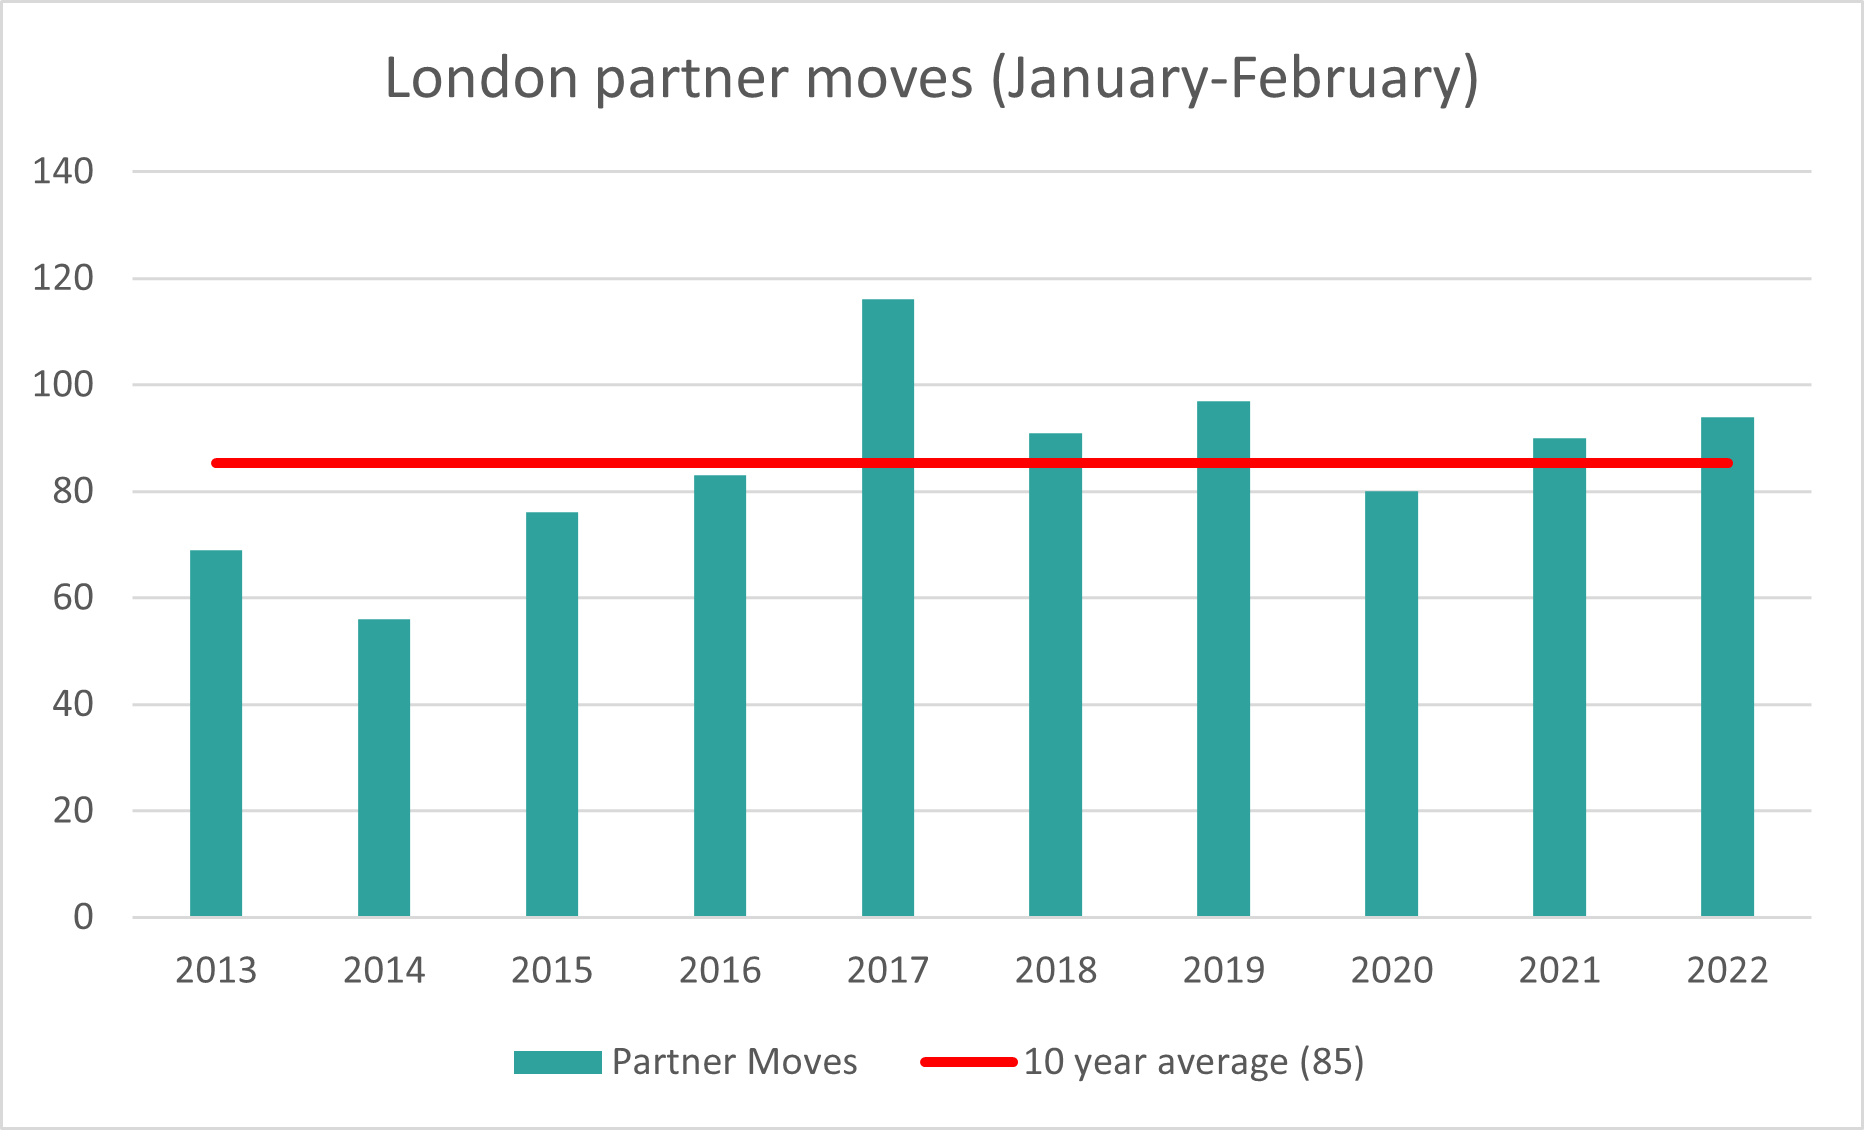 London partner moves over the last 10 years